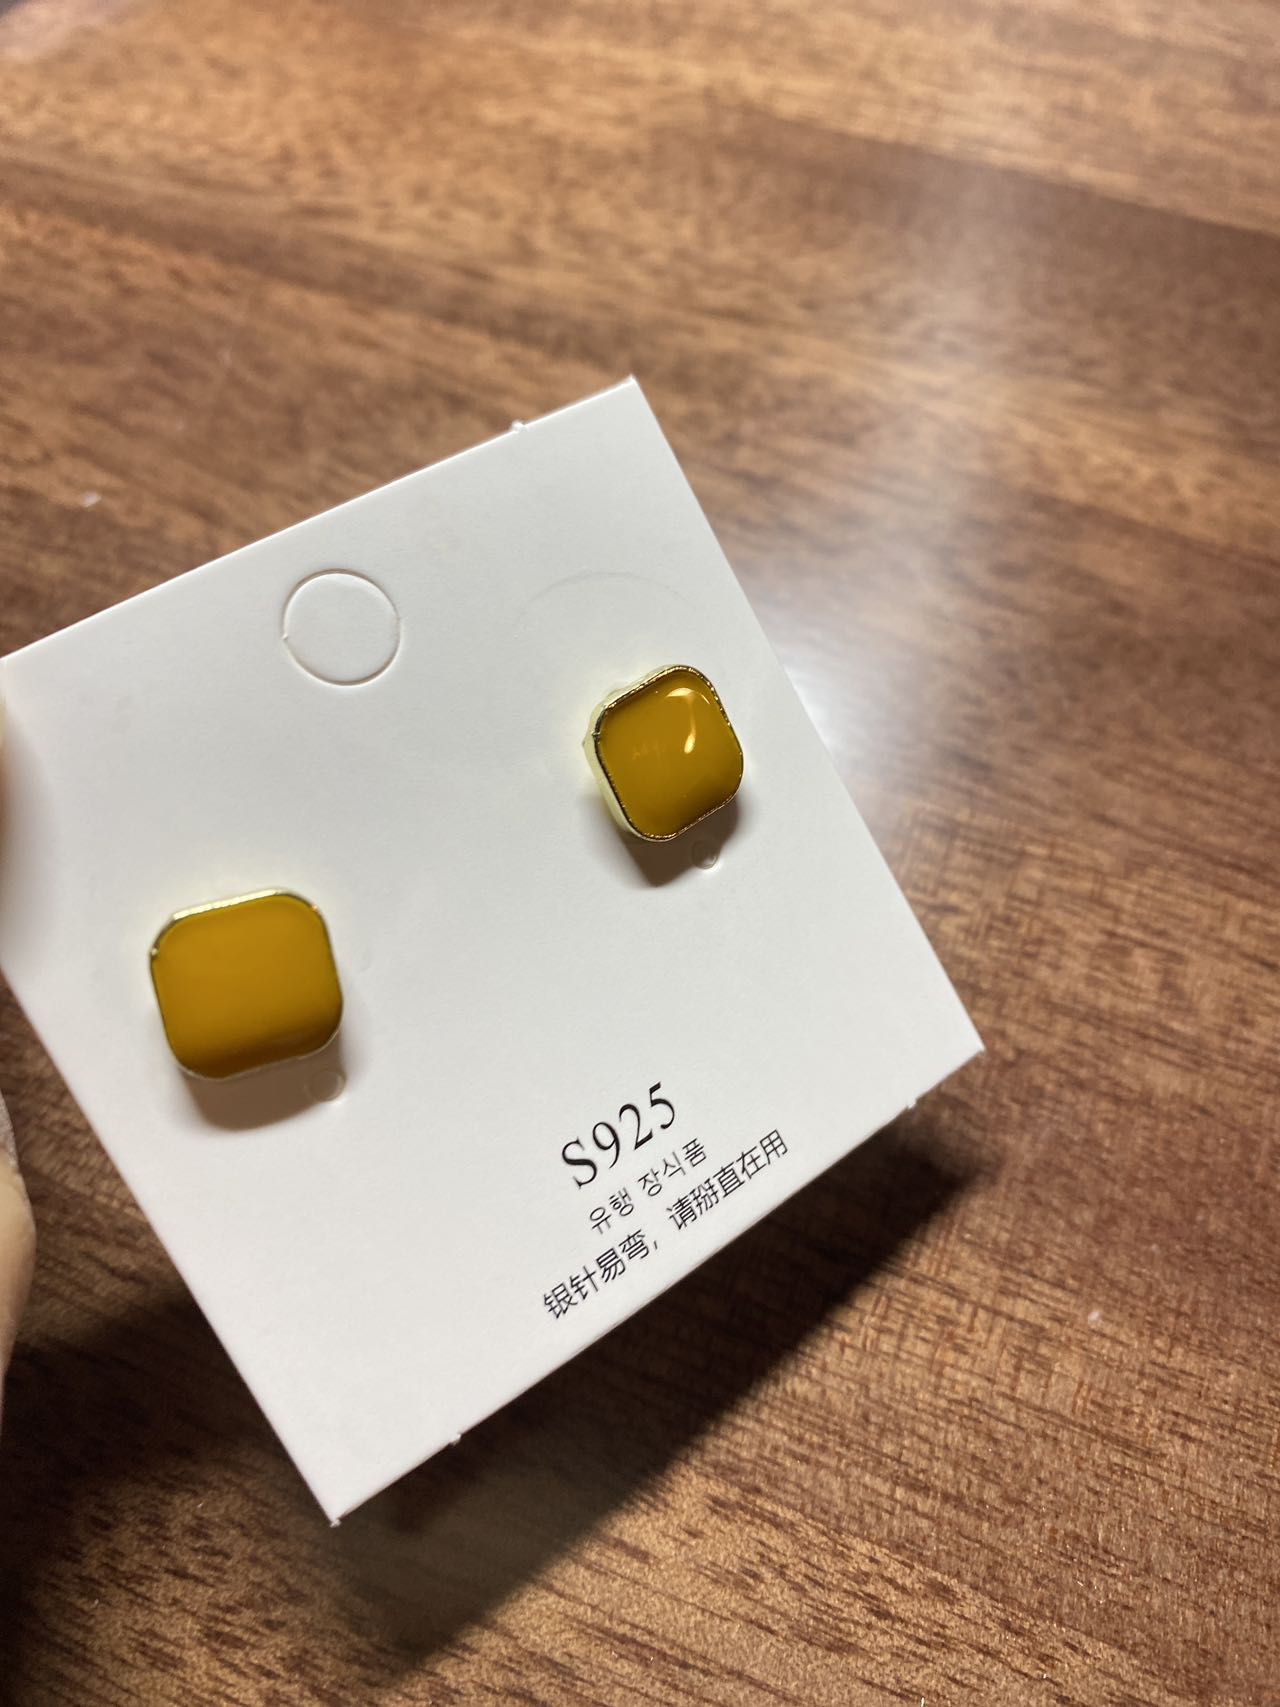 Small square yellow earrings